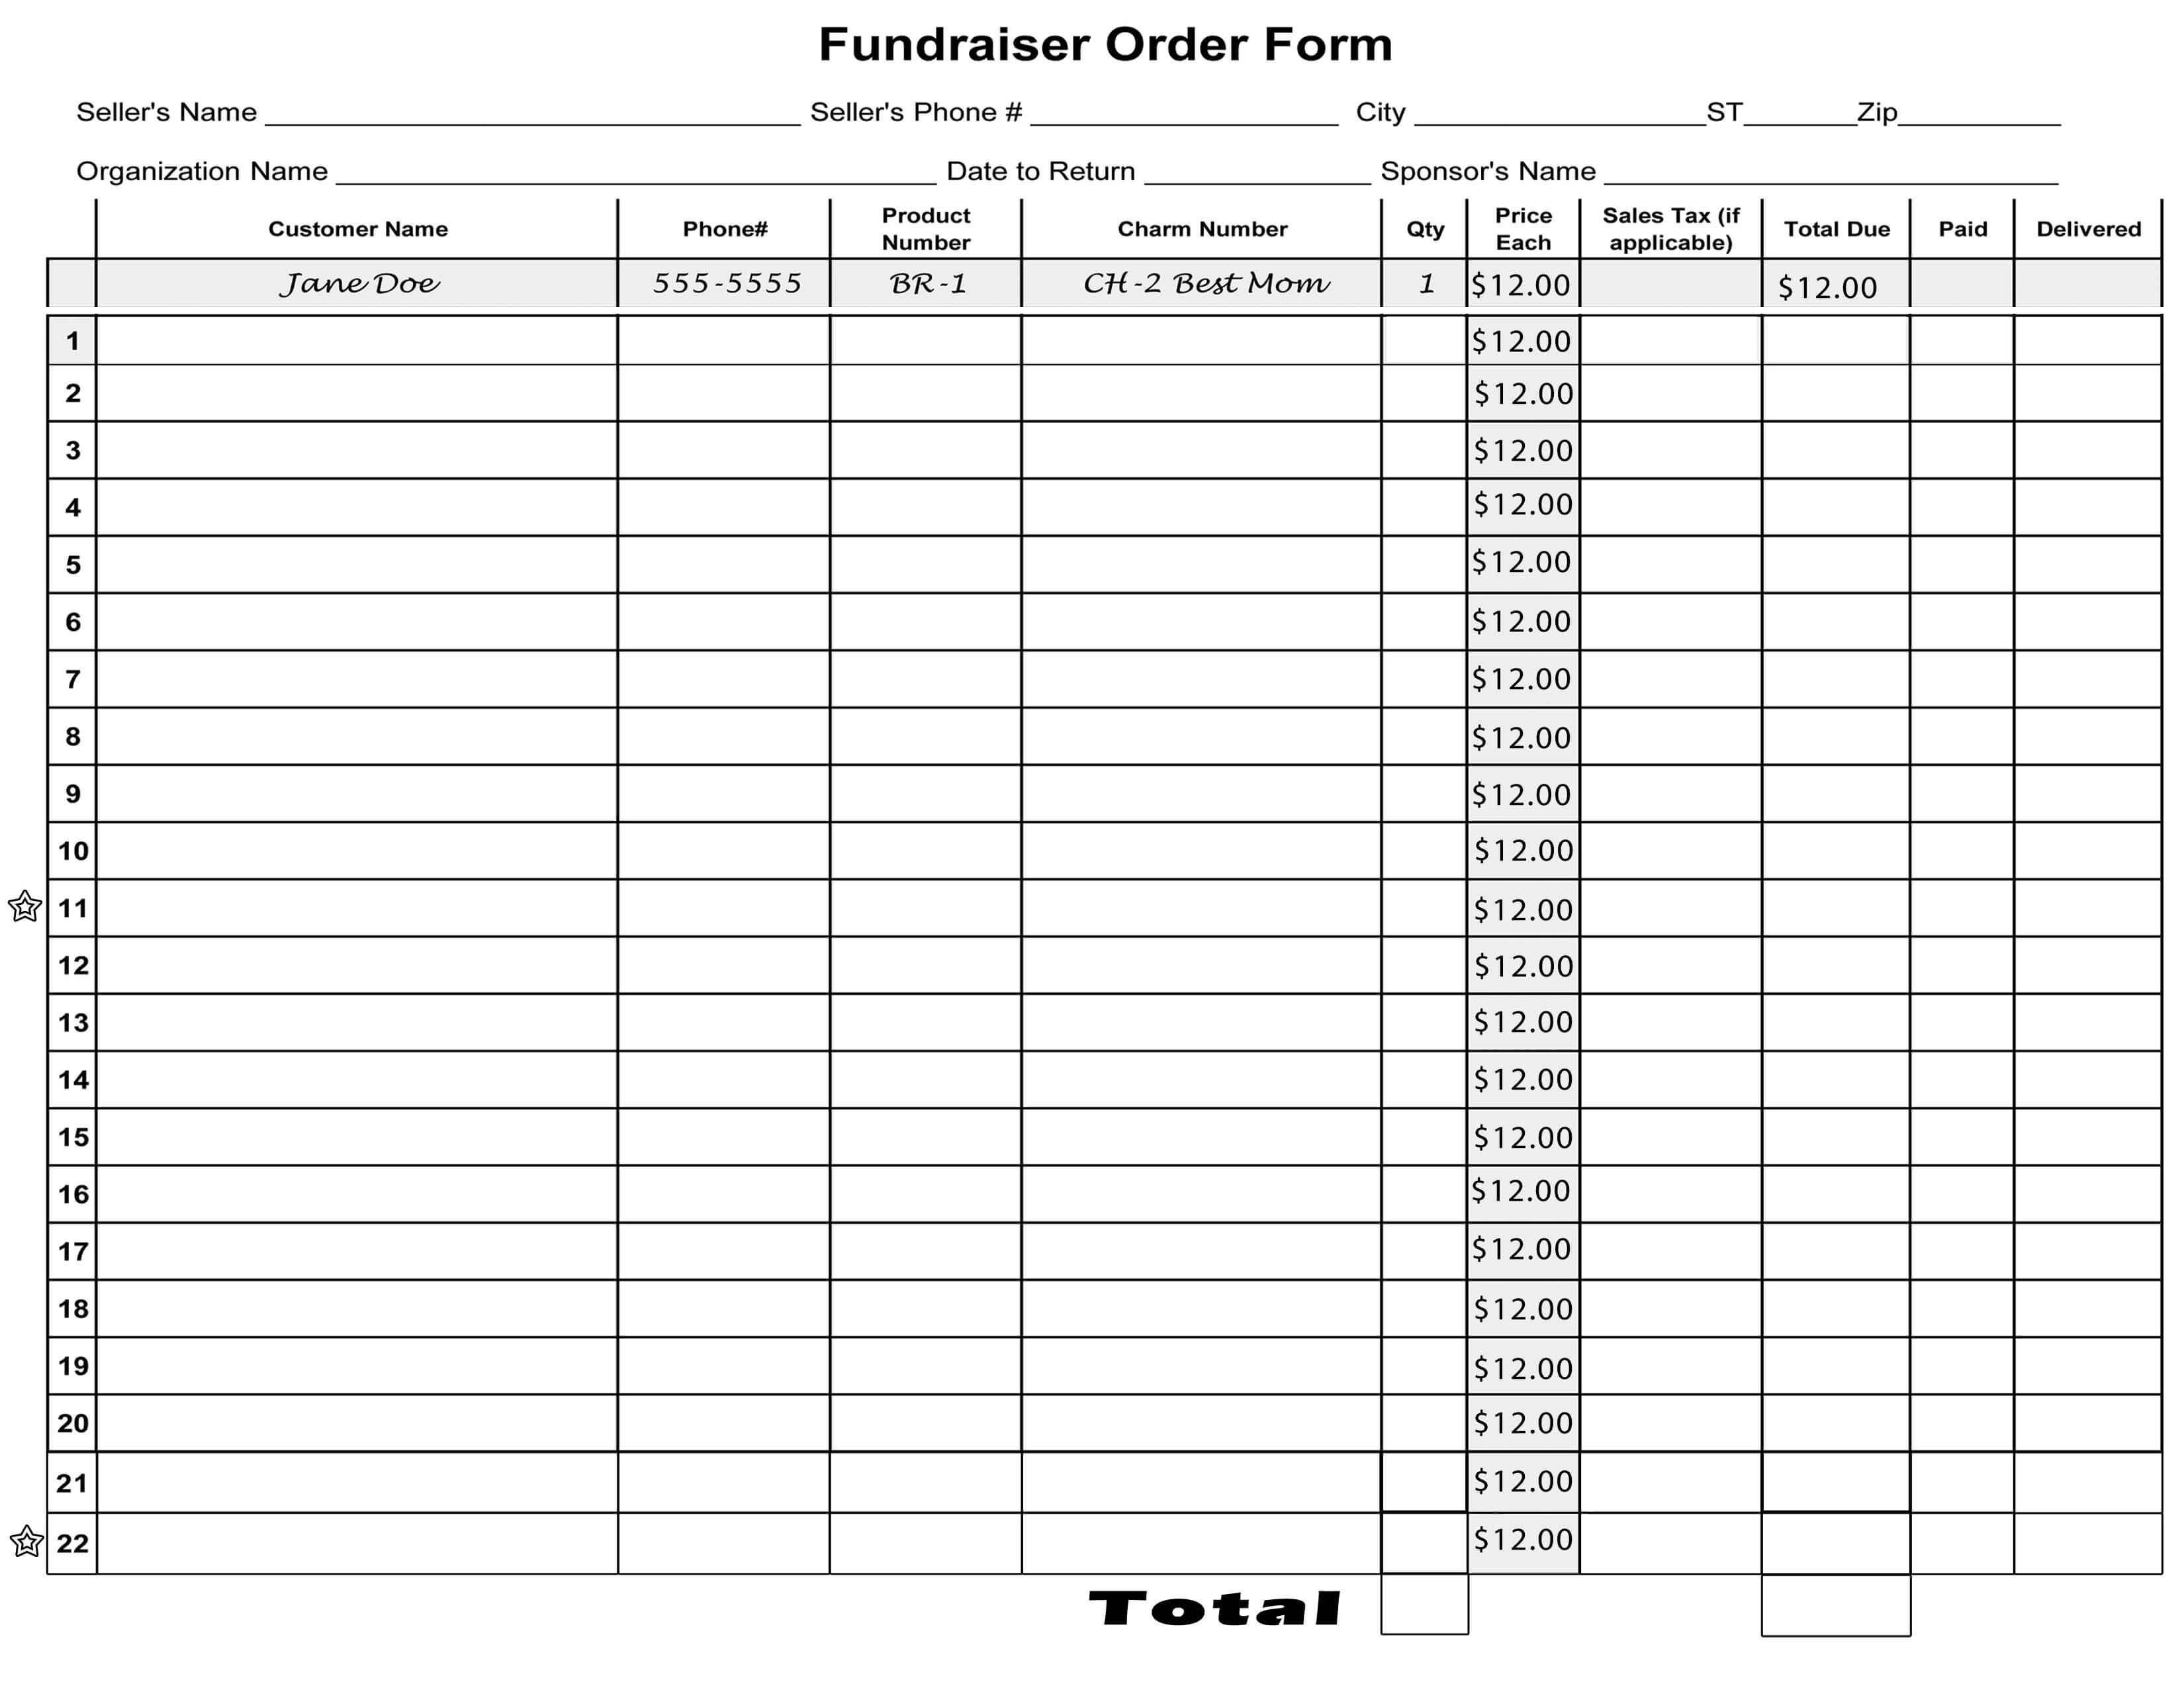 Free Blank Order Form Template | Blank Fundraiser Order Form Throughout Blank Fundraiser Order Form Template